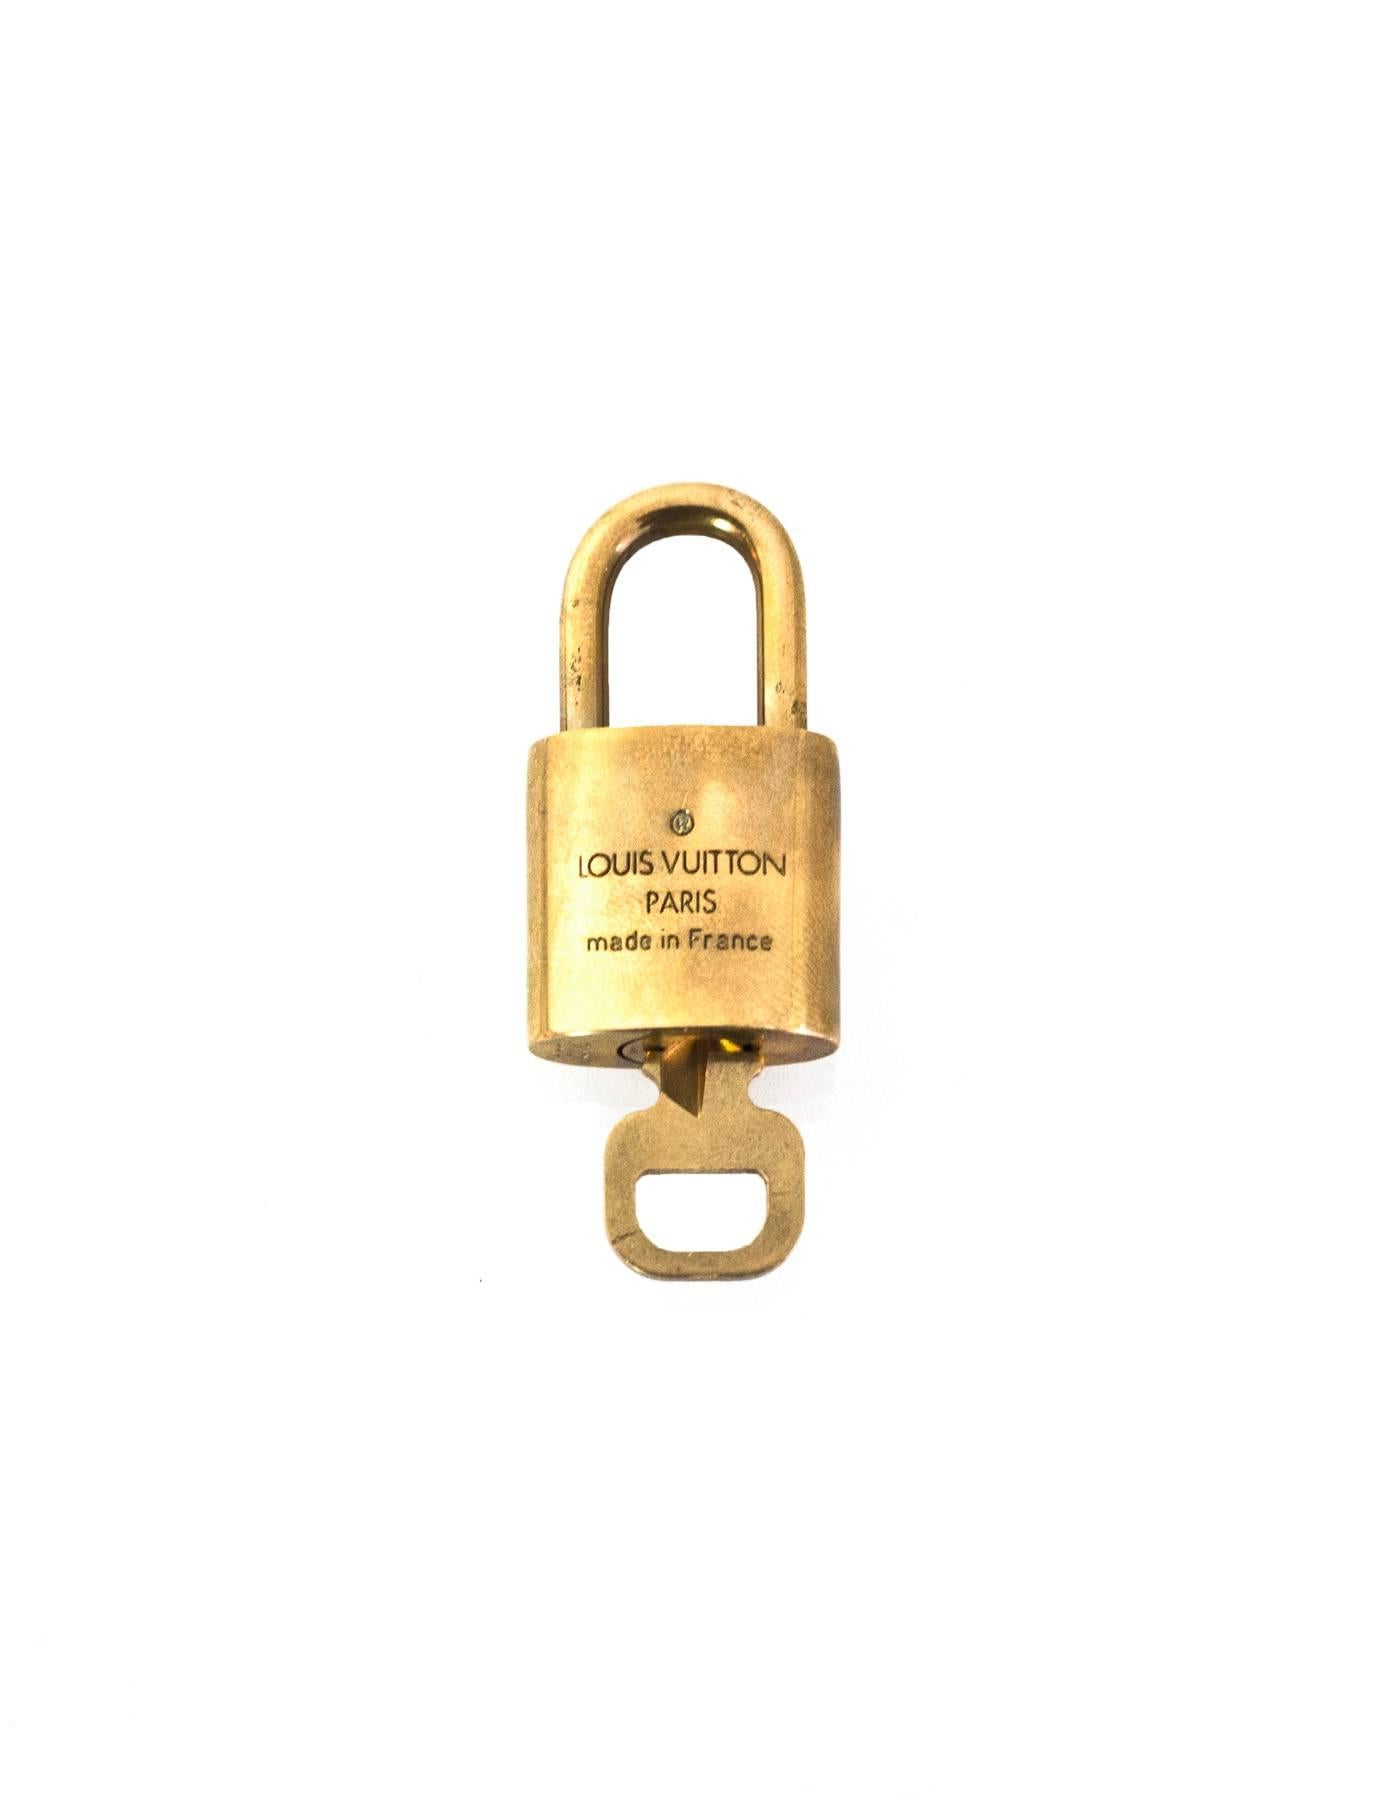 Louis Vuitton Goldtone Lock & Key

Made In: France
Color: Gold
Hardware: Goldtone
Materials: Metal
Stamp: Louis Vuitton Made in France 302
Overall Condition: Very good good pre-owned condition, light tarnish throughout
Includes: Lock, one